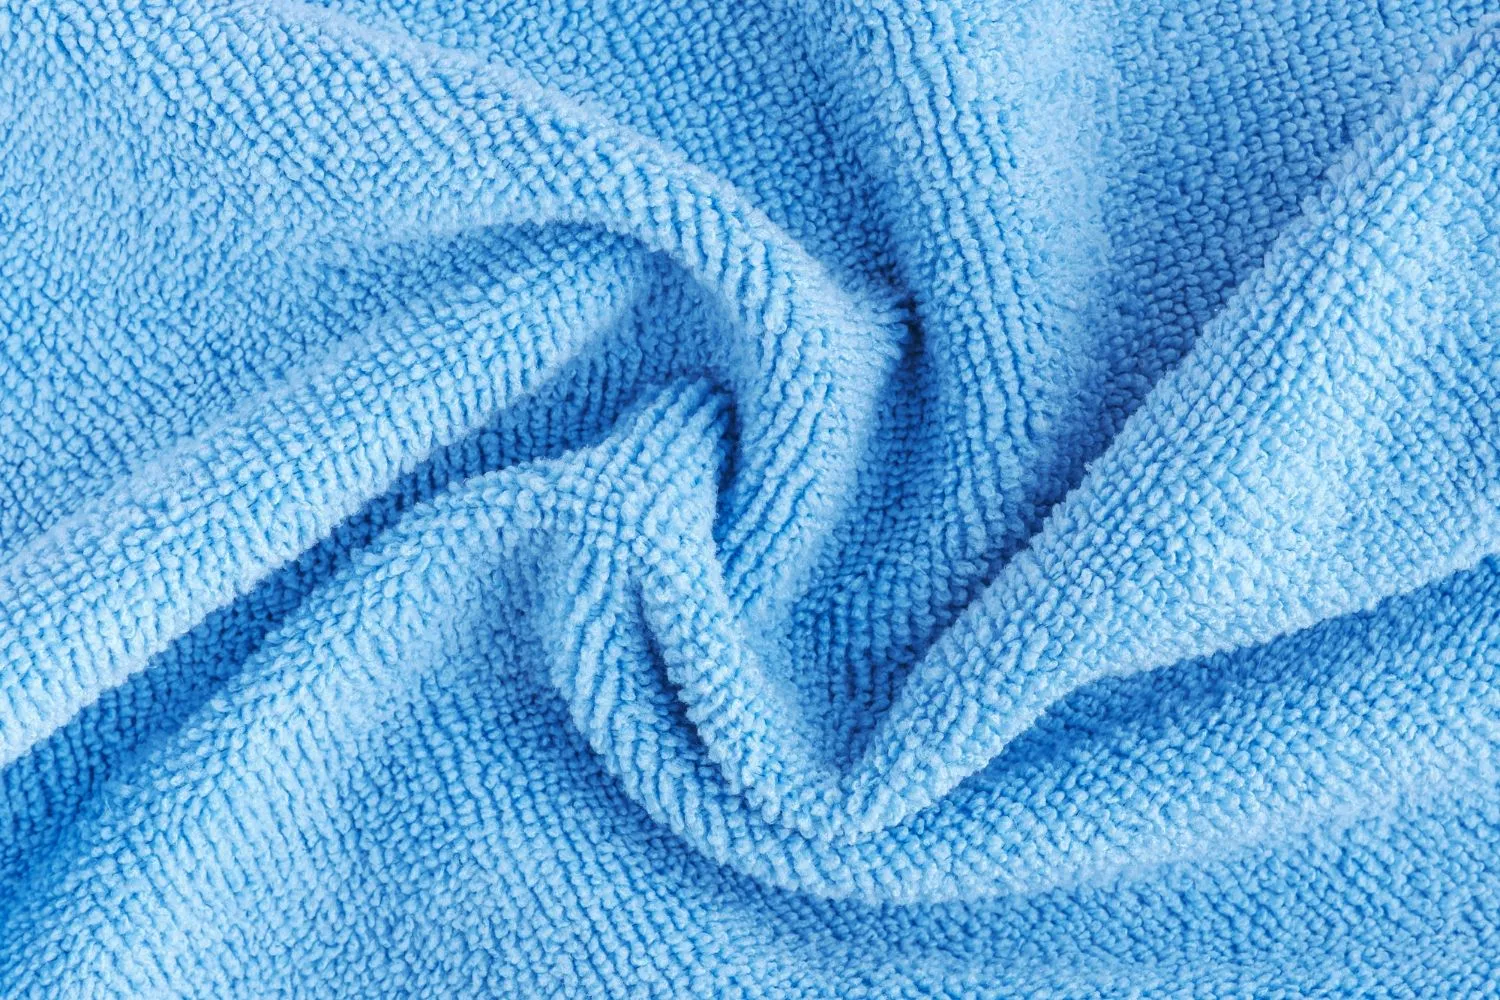 The Magnificent Microfiber - The Science Behind Why Your House Will Never Be Cleaner